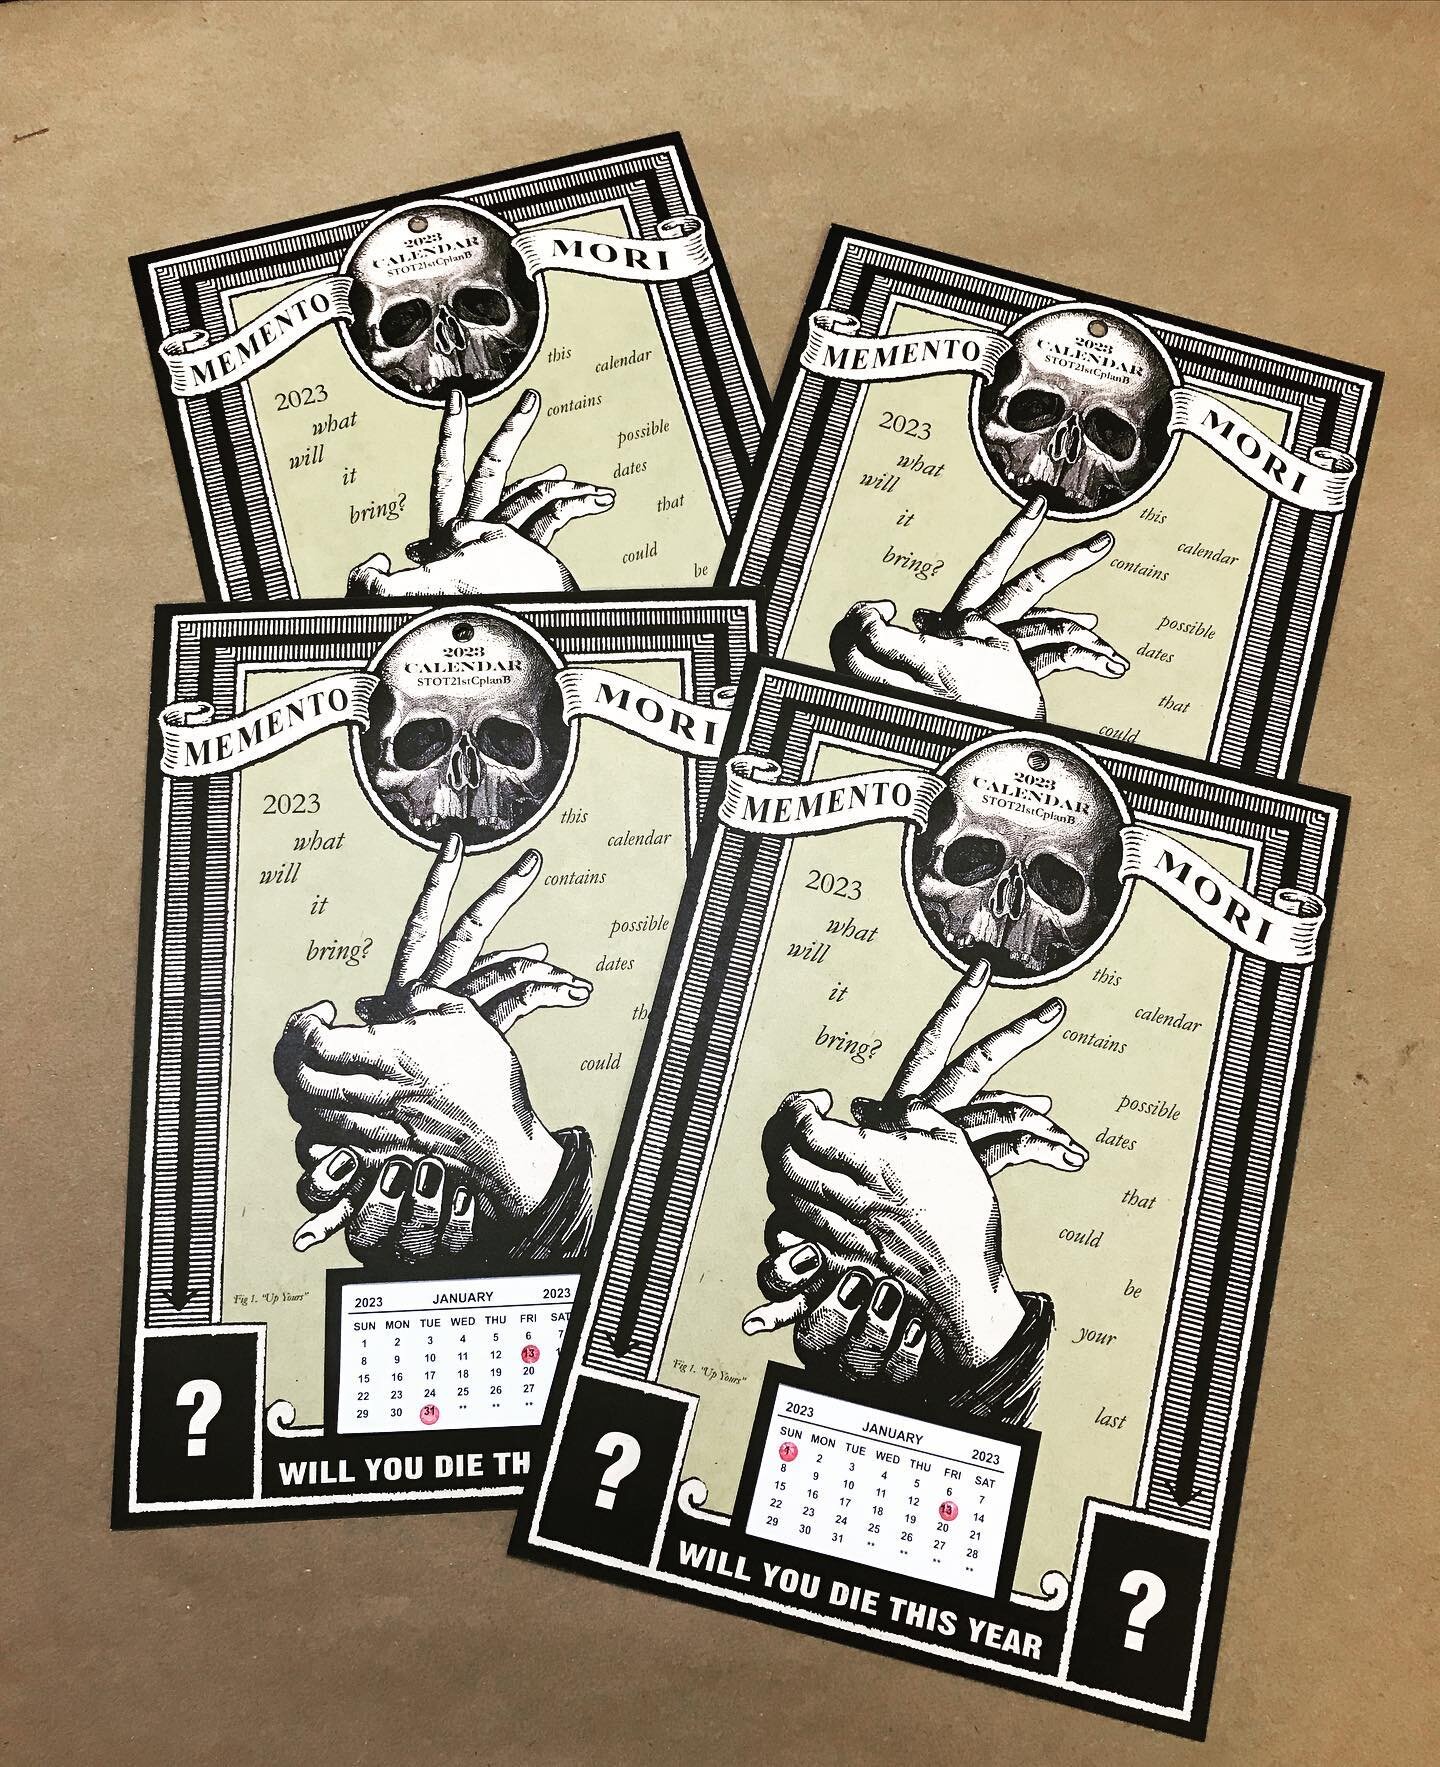 Have you got your 2023 WILL I DIE THIS YEAR Calendar yet? If not why not?? Go get one now from L-13.org! It also has an important message on the back from our sponsors K2 Plat Hire Ltd about MuMufication. Buy Now - Die Later #STOT21stCplanB #STOT21 #